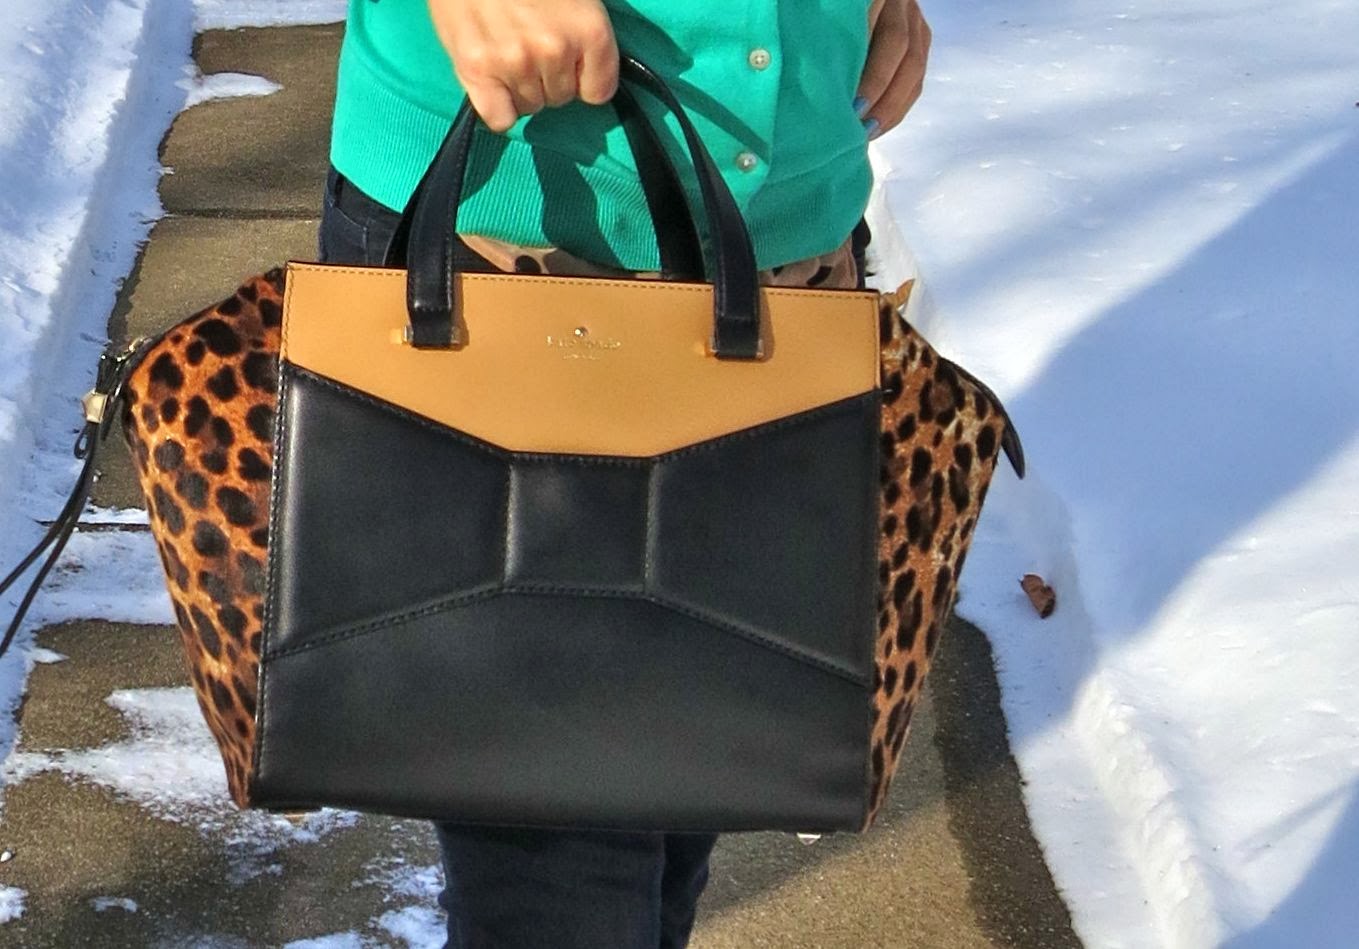 Kate Spade All Day Structured Tote Leopard Print